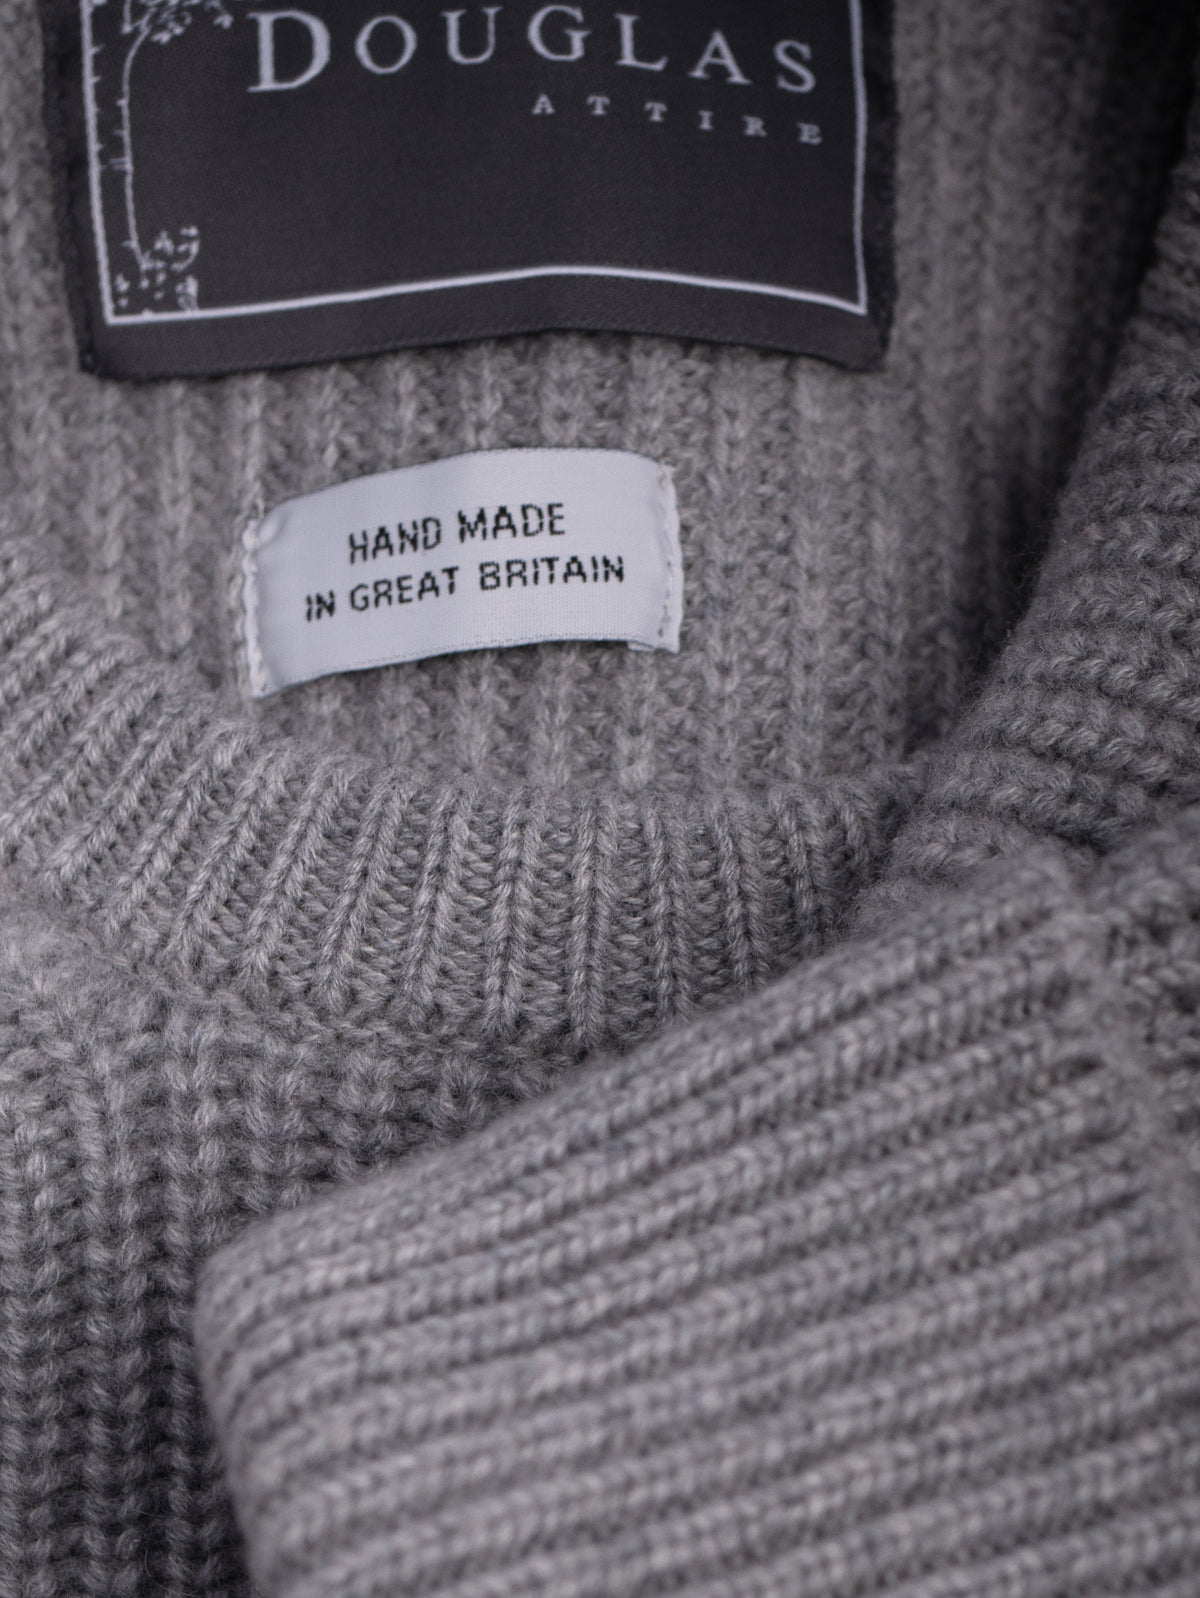 RIBBED SWEATER&lt;br&gt;GREY